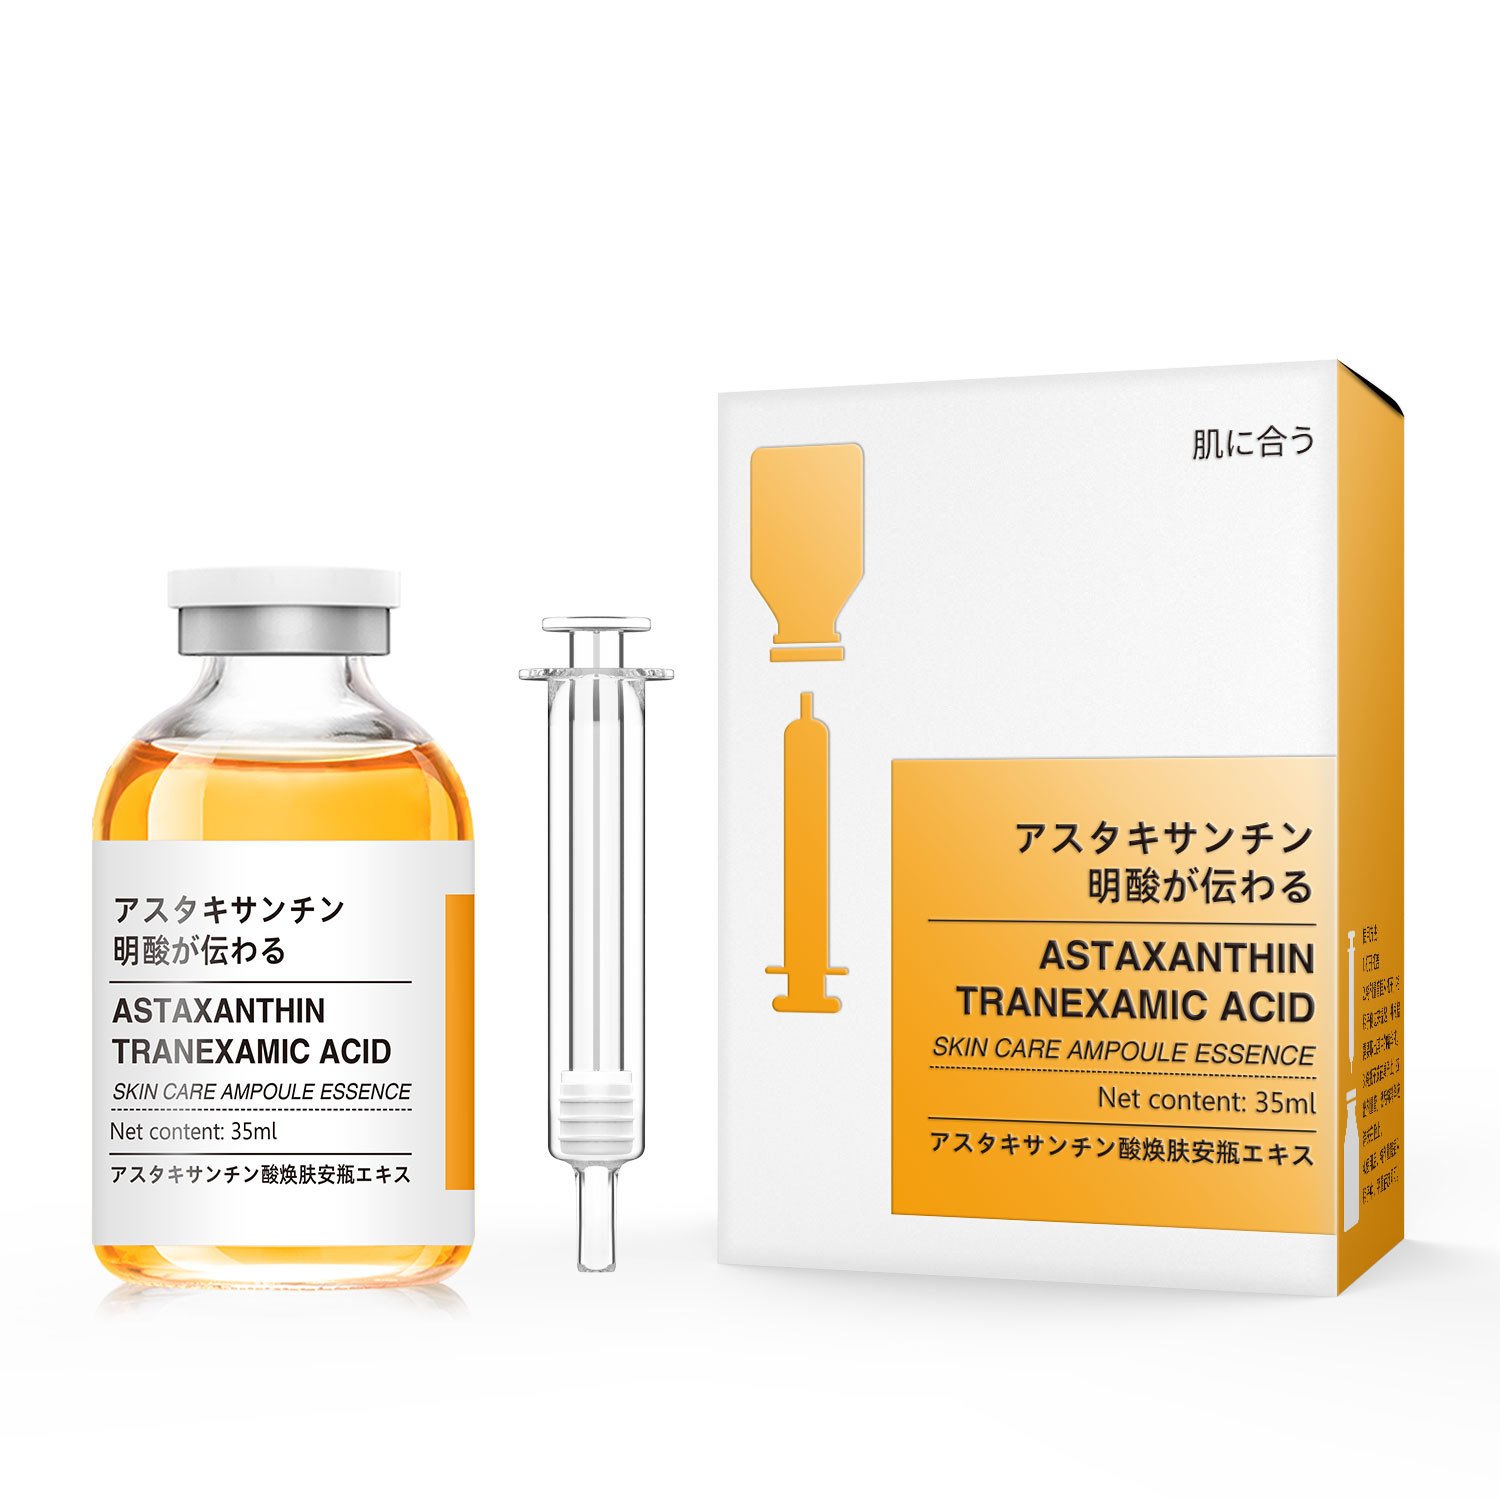 🎉Buy 2 Get 1 Free🎁Astaxanthin Collagen Lifting Ampoule Essence